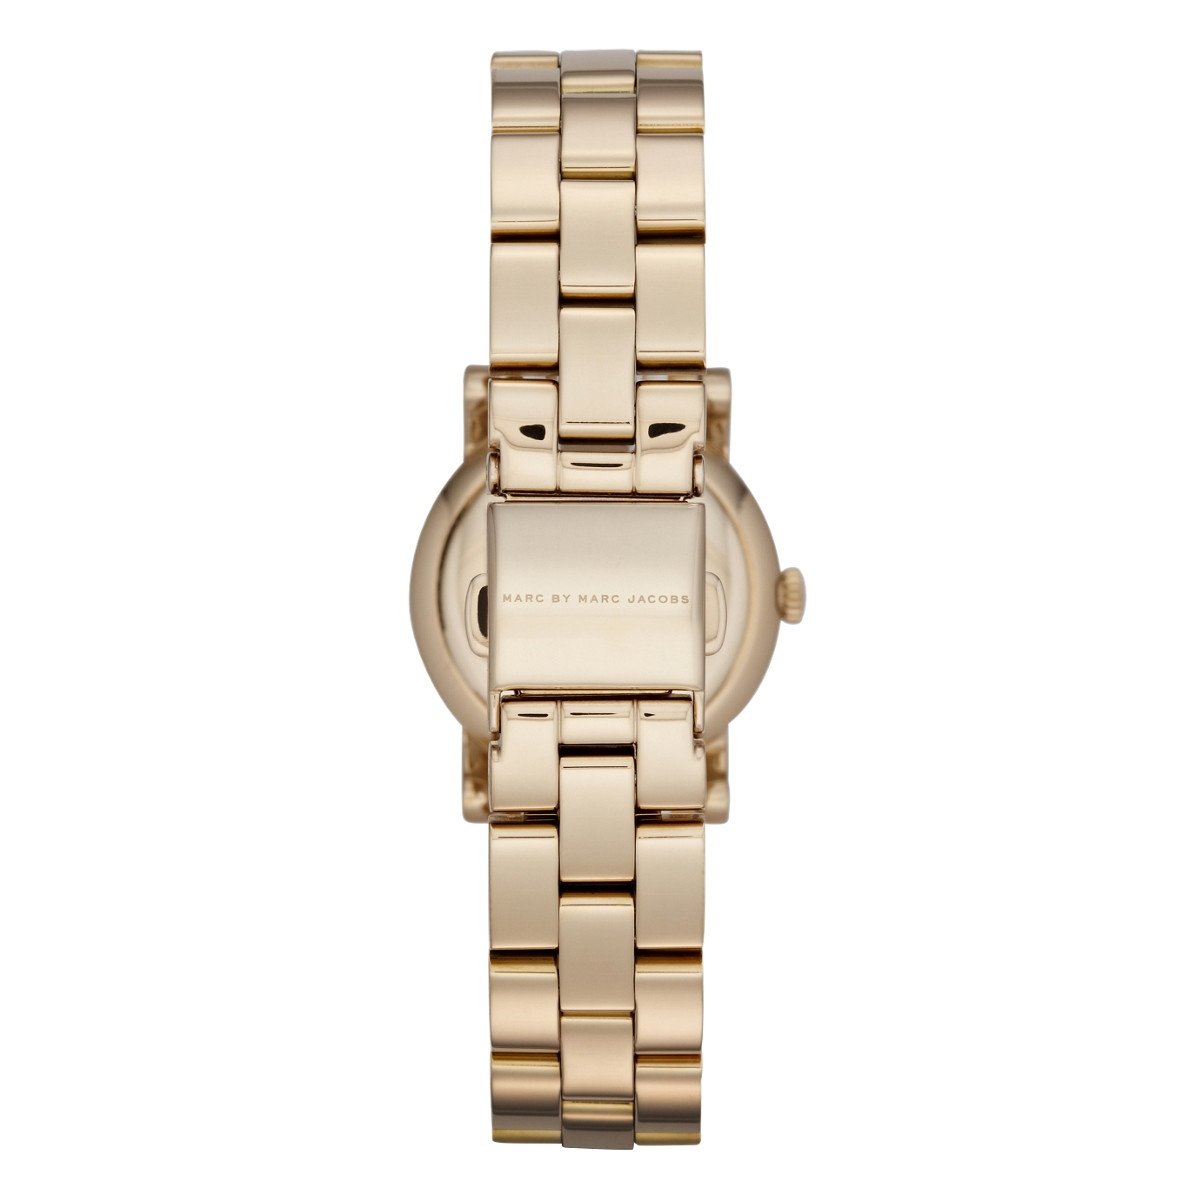 Ladies / Womens AMY Dexter Gold Stainless Steel Marc Jacobs Designer Watch MBM3218